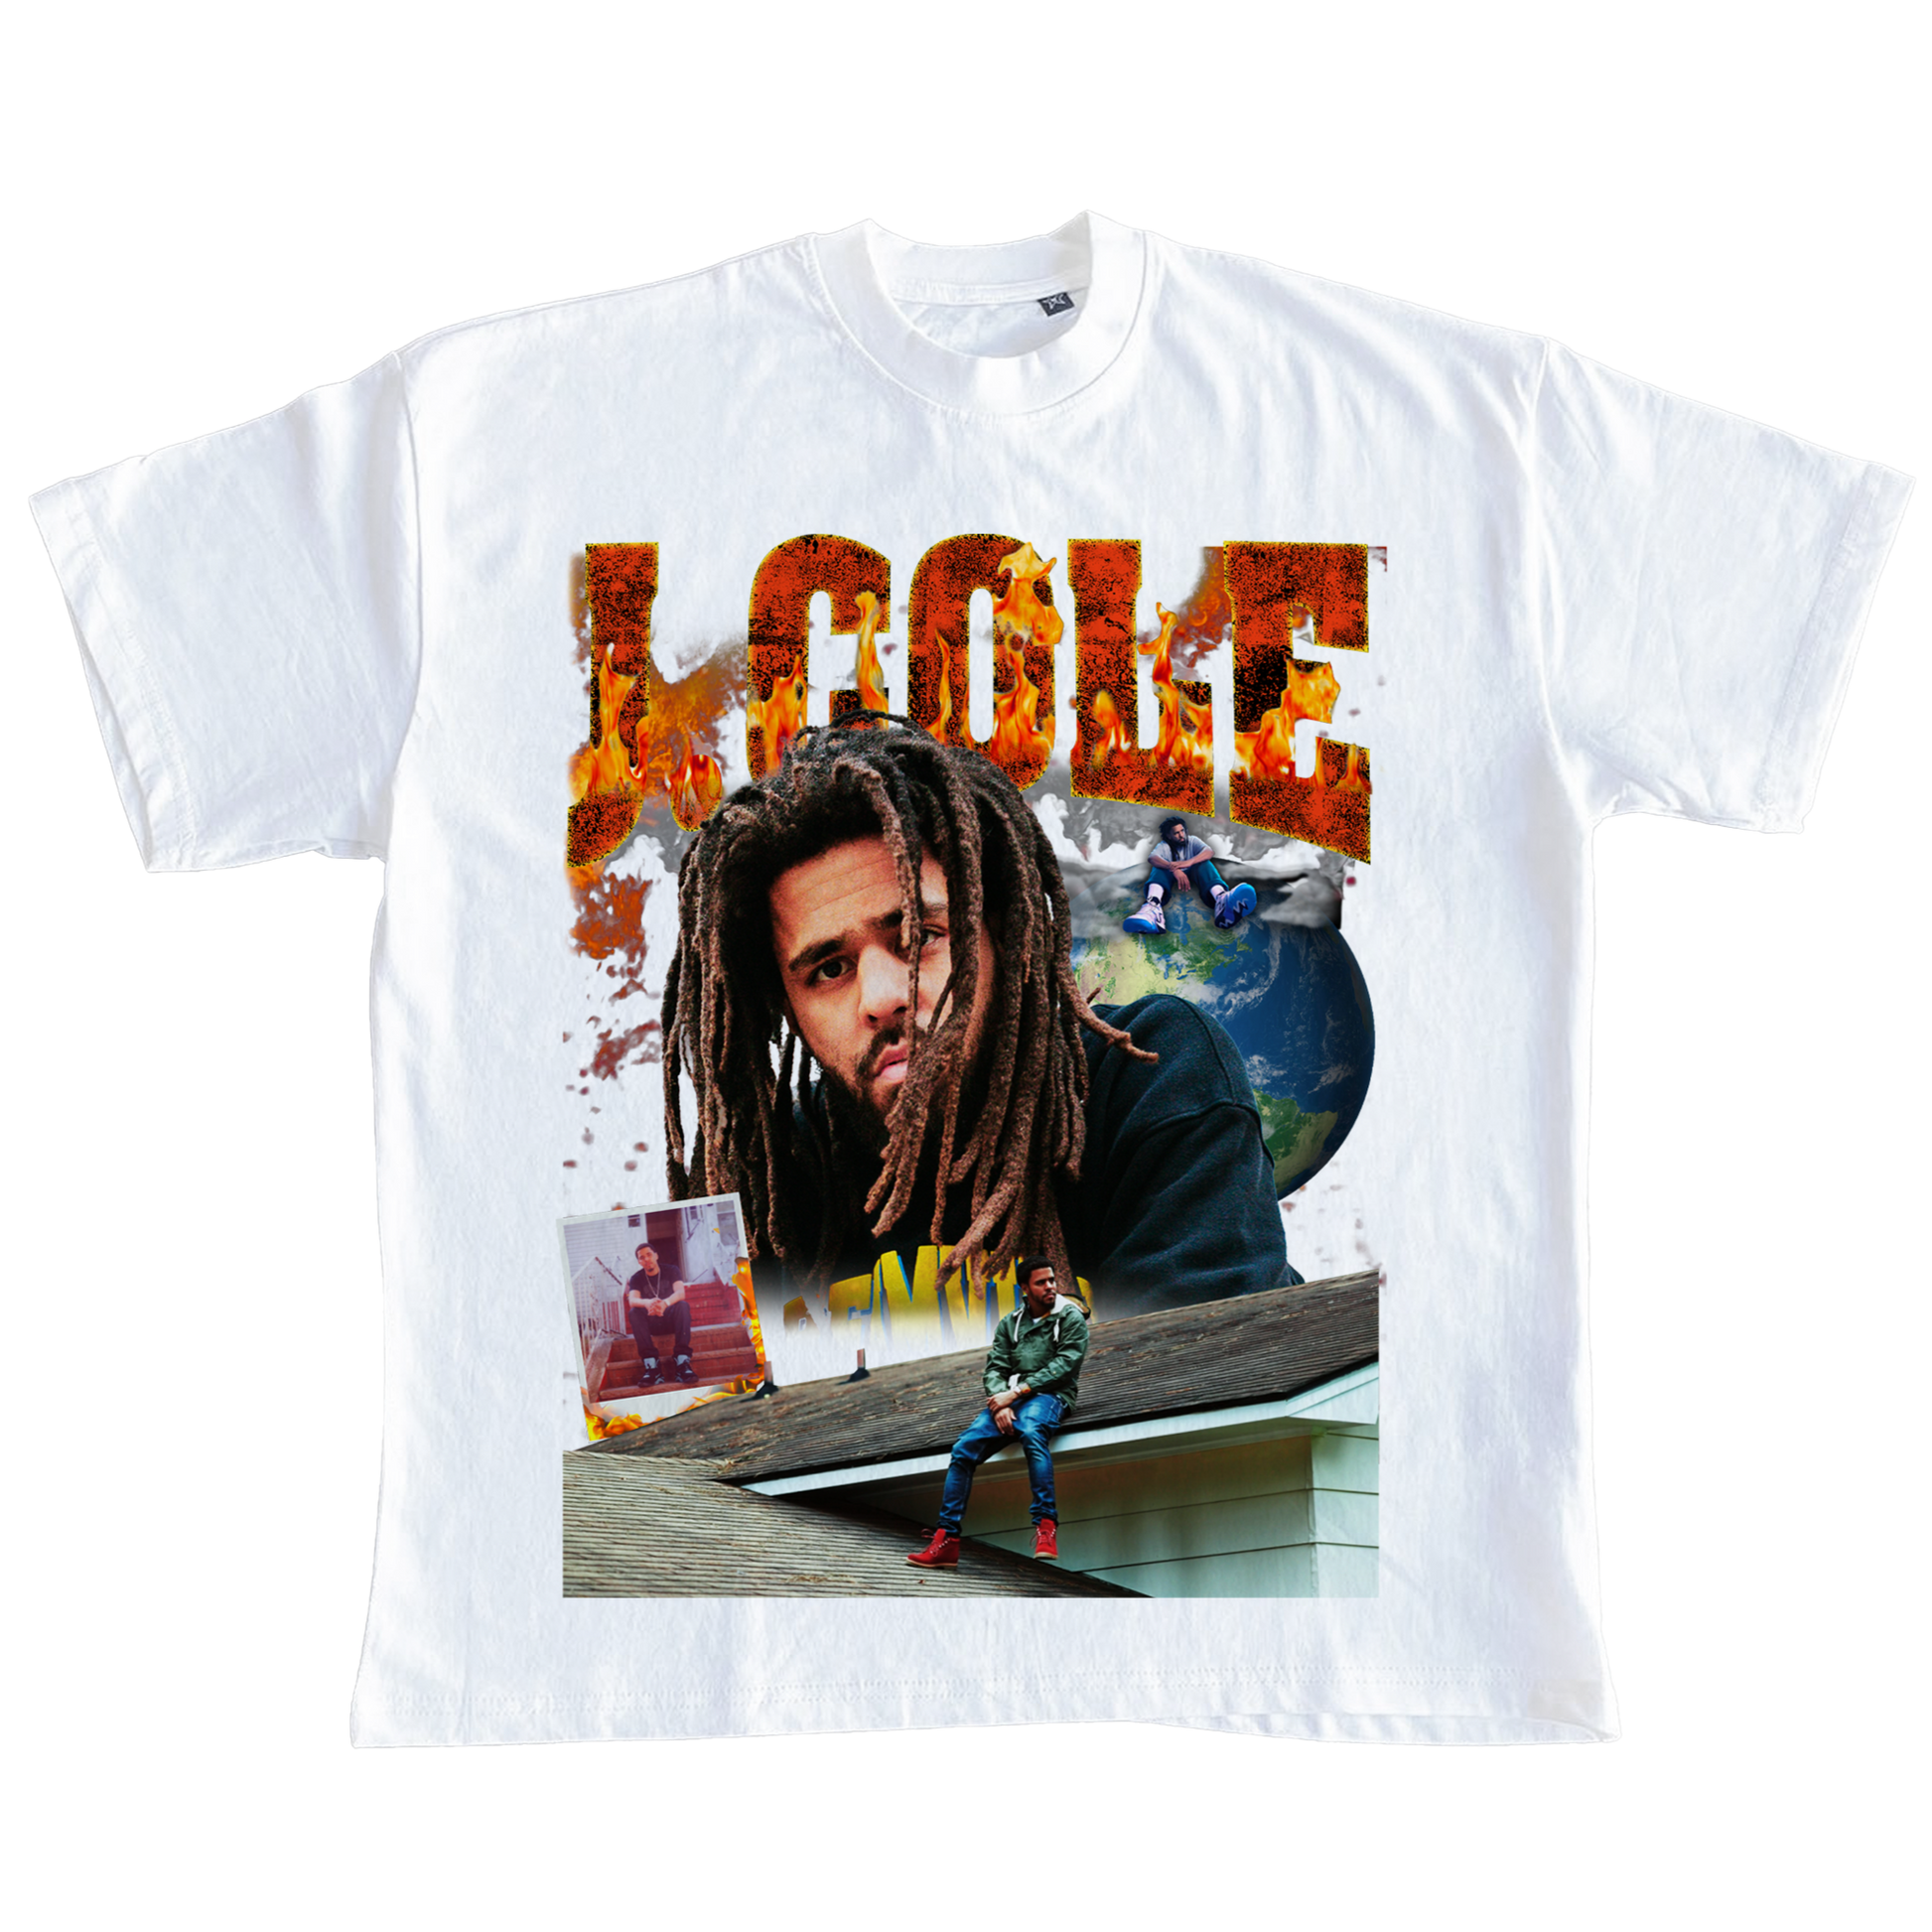 White J. Cole t-shirt in the style of vintage rap tees with J. Cole flame text